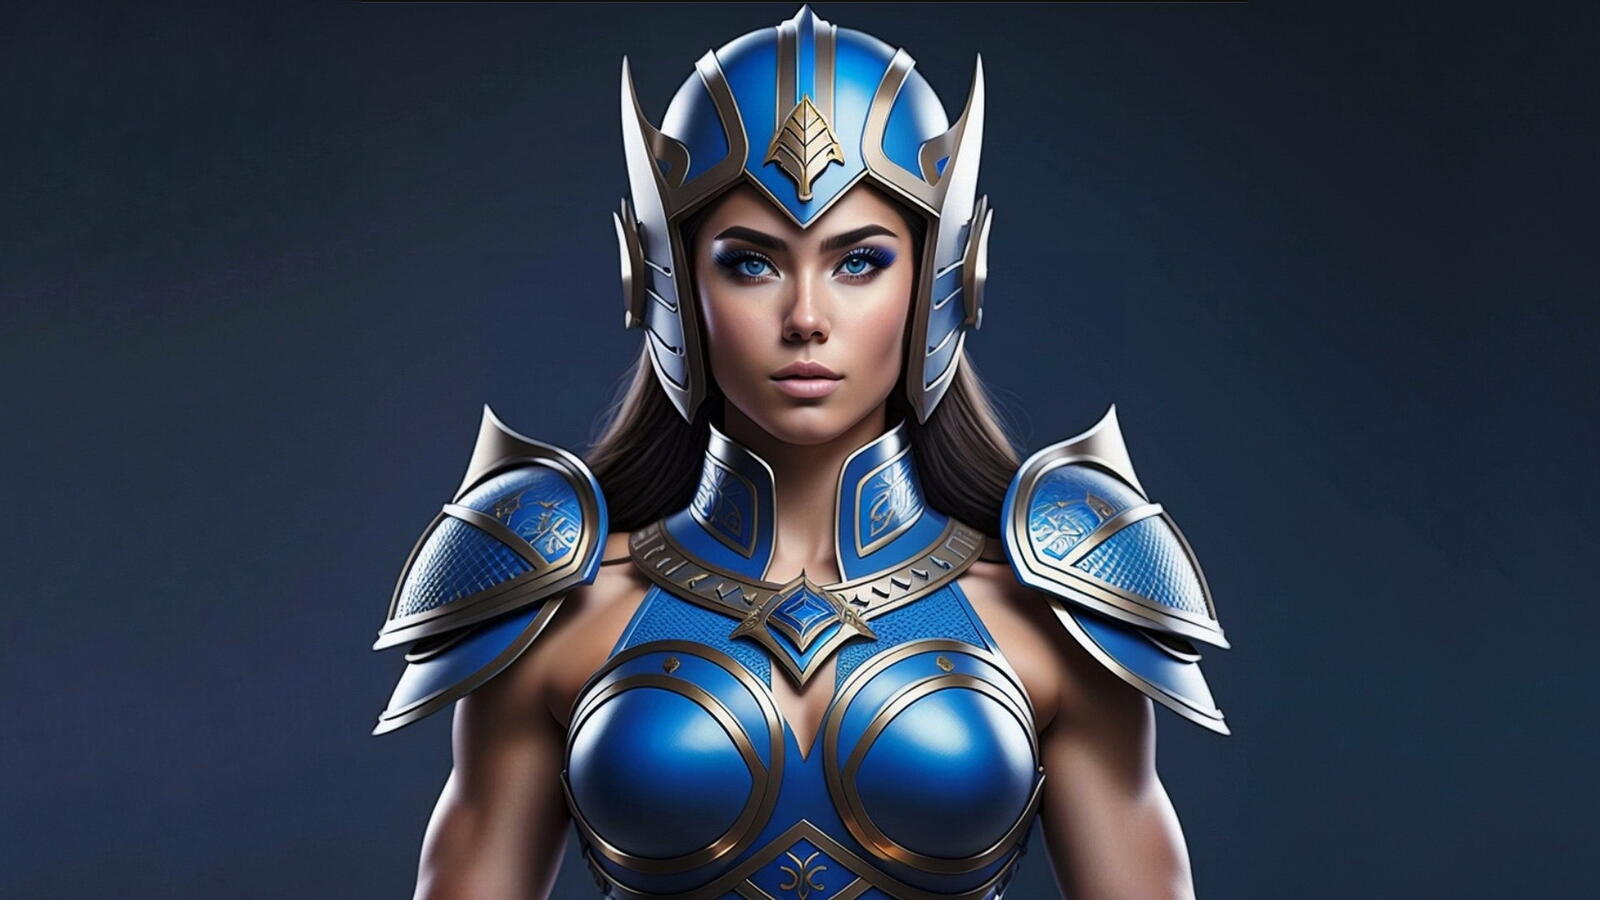 Free photo Portrait of a girl warrior in blue armor